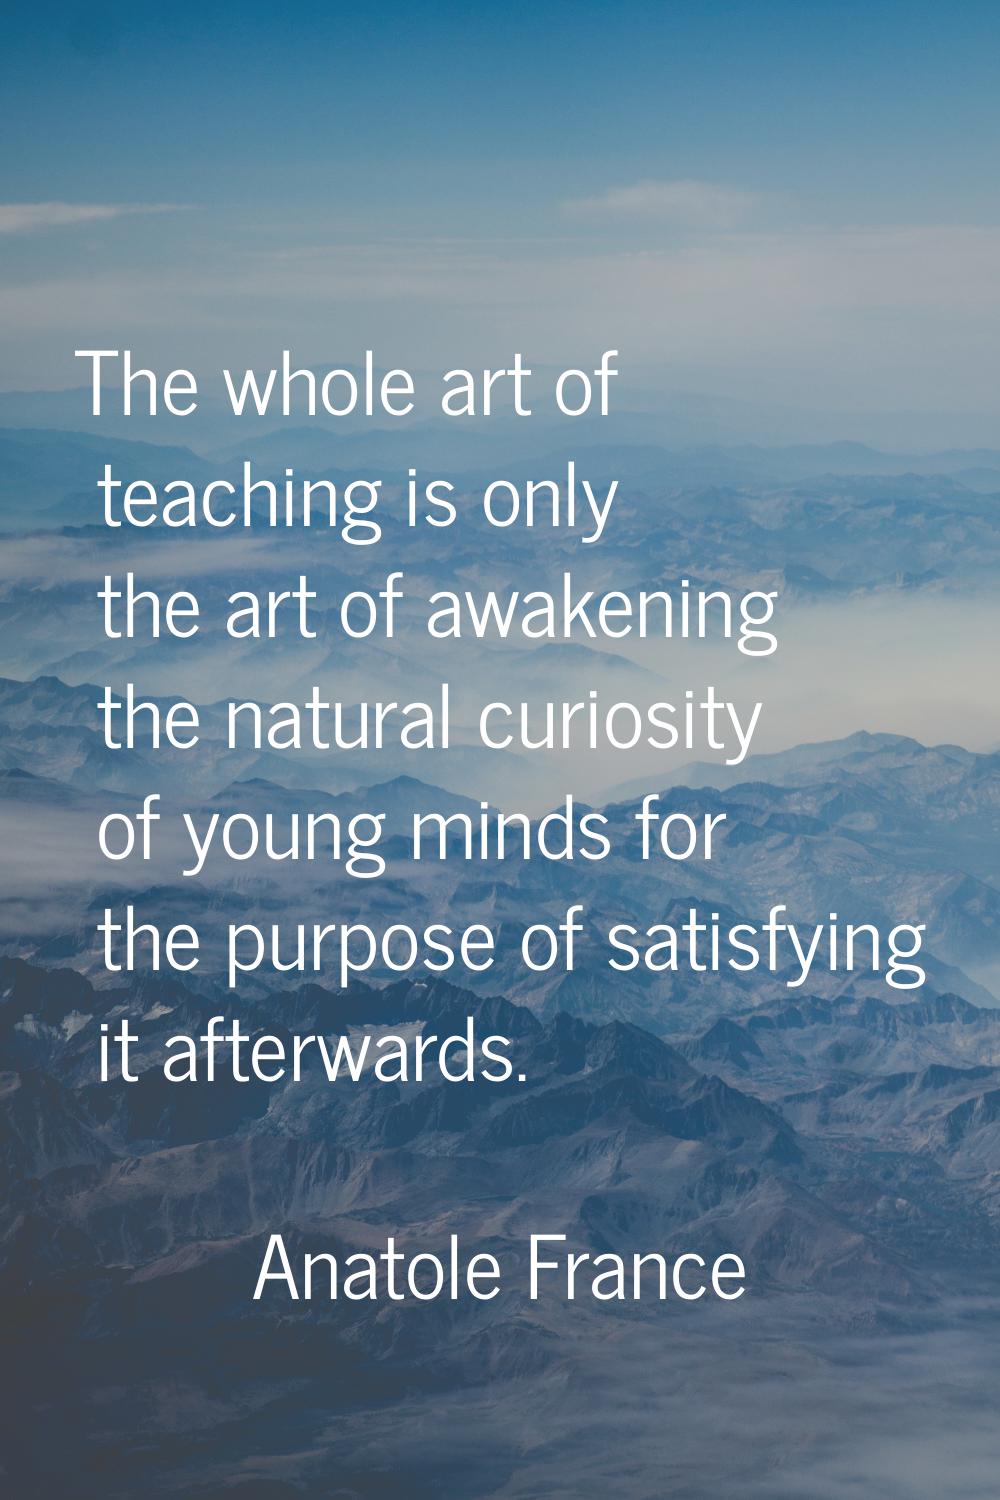 The whole art of teaching is only the art of awakening the natural curiosity of young minds for the